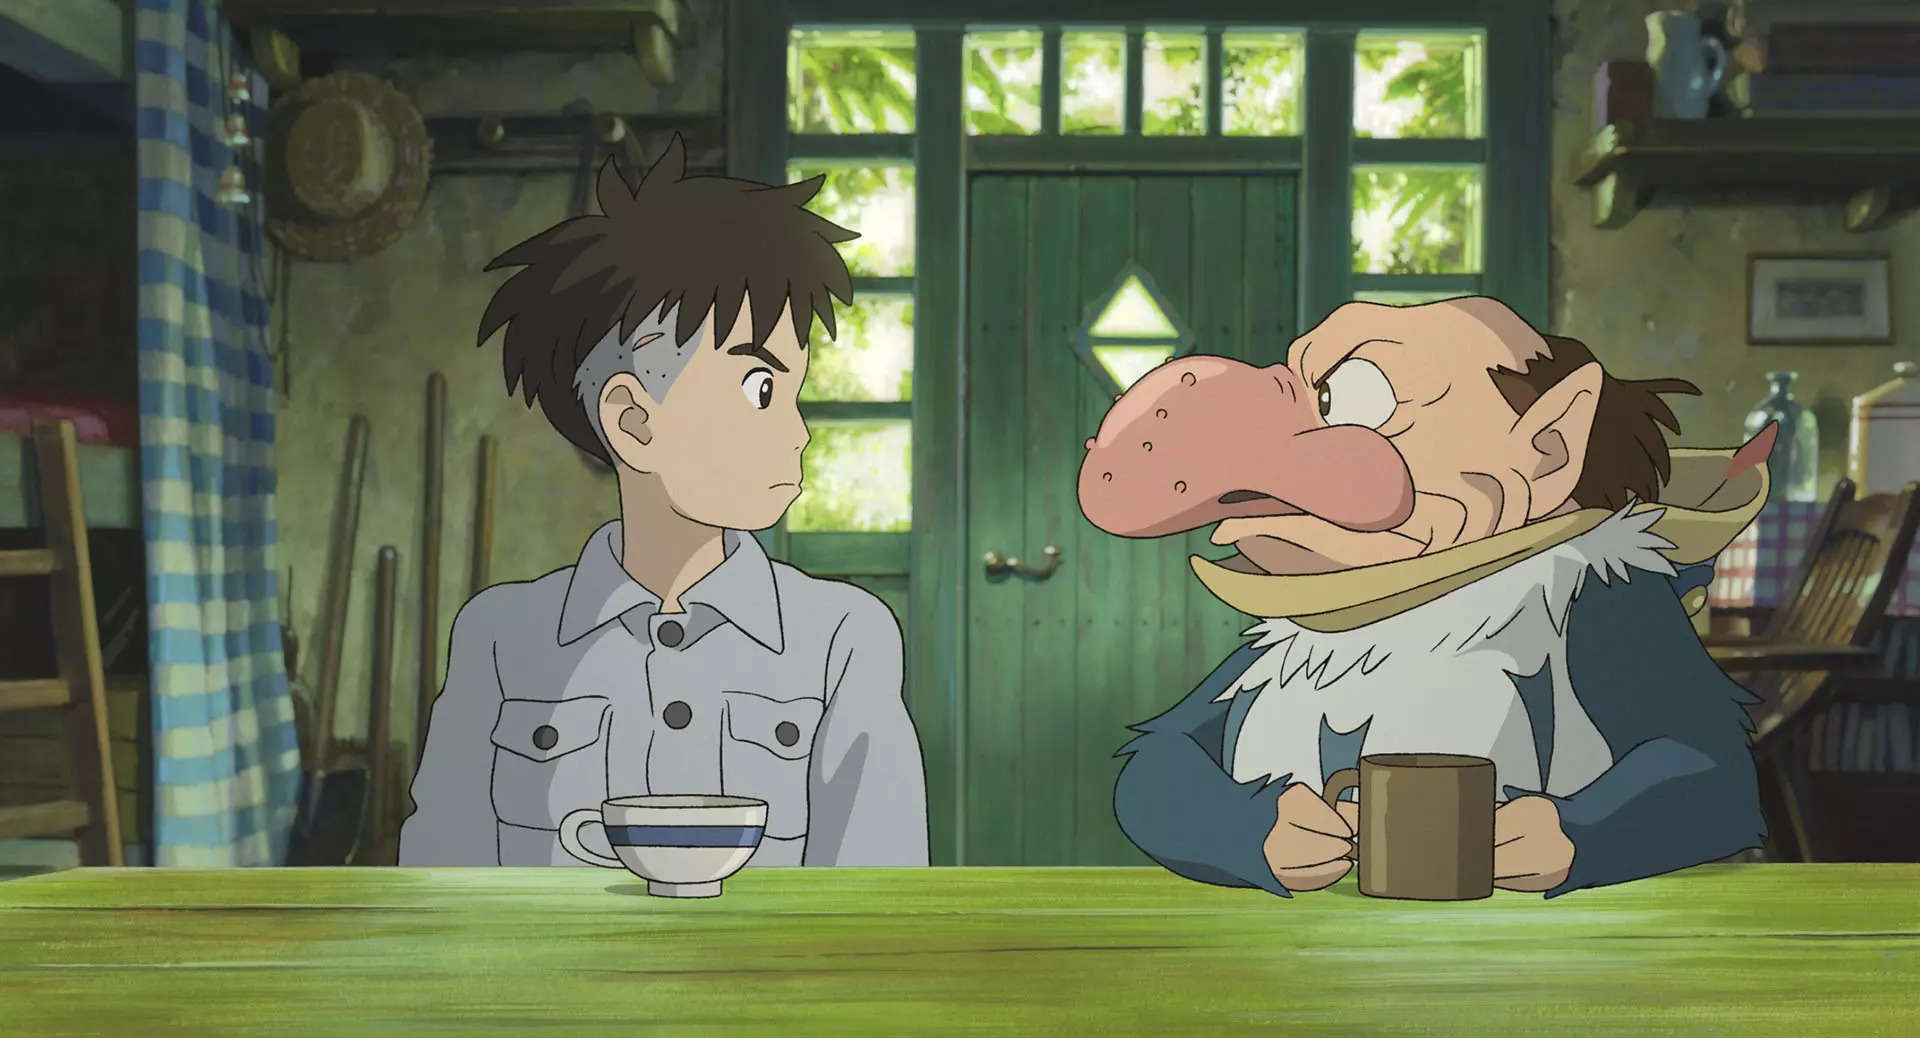 The Boy and the Heron streaming release: When and where to watch in US and UK 